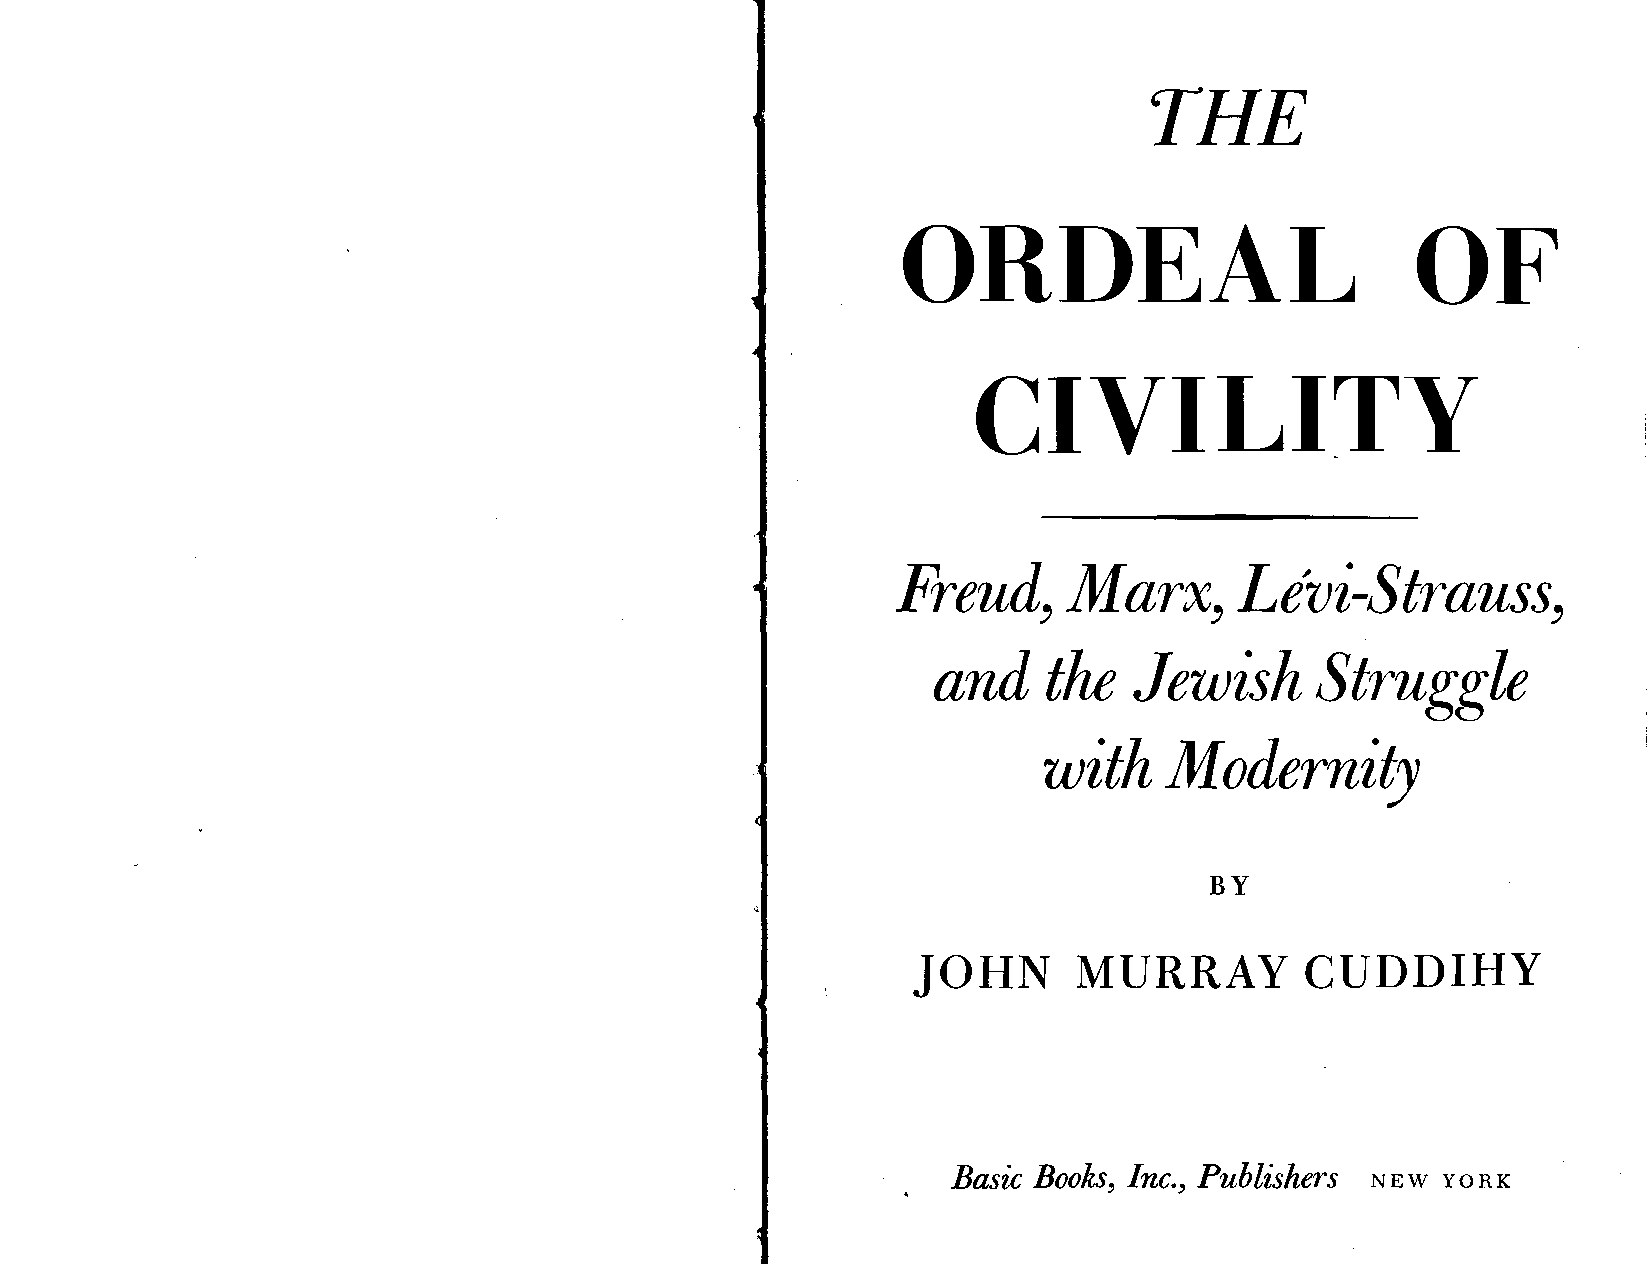 Cuddihy, John; The Ordeal of Civility